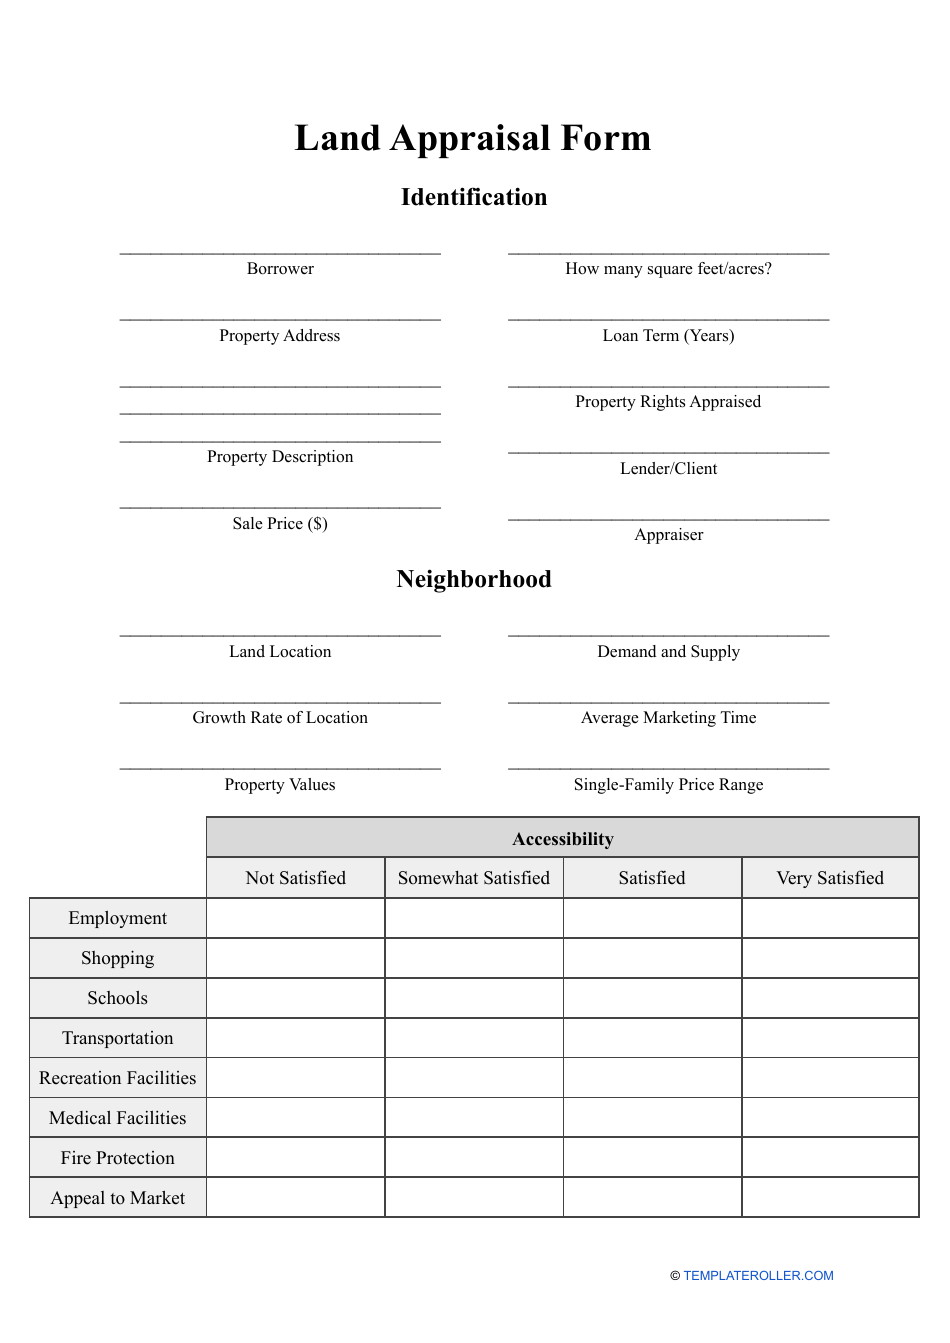 Land Appraisal Form, Page 1